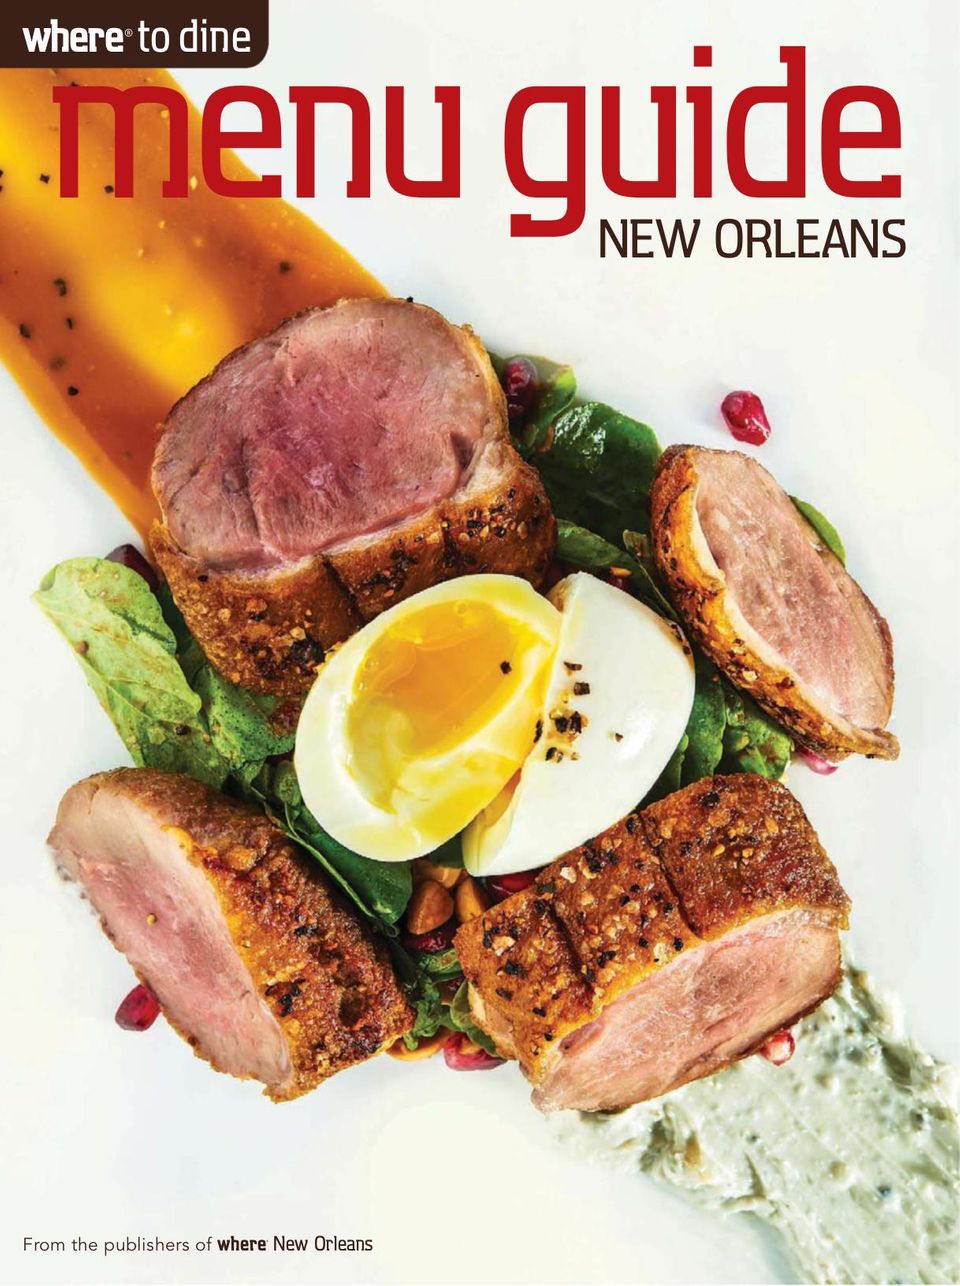 870809 Menu Guide New Orleans Cover 2019 Issue 